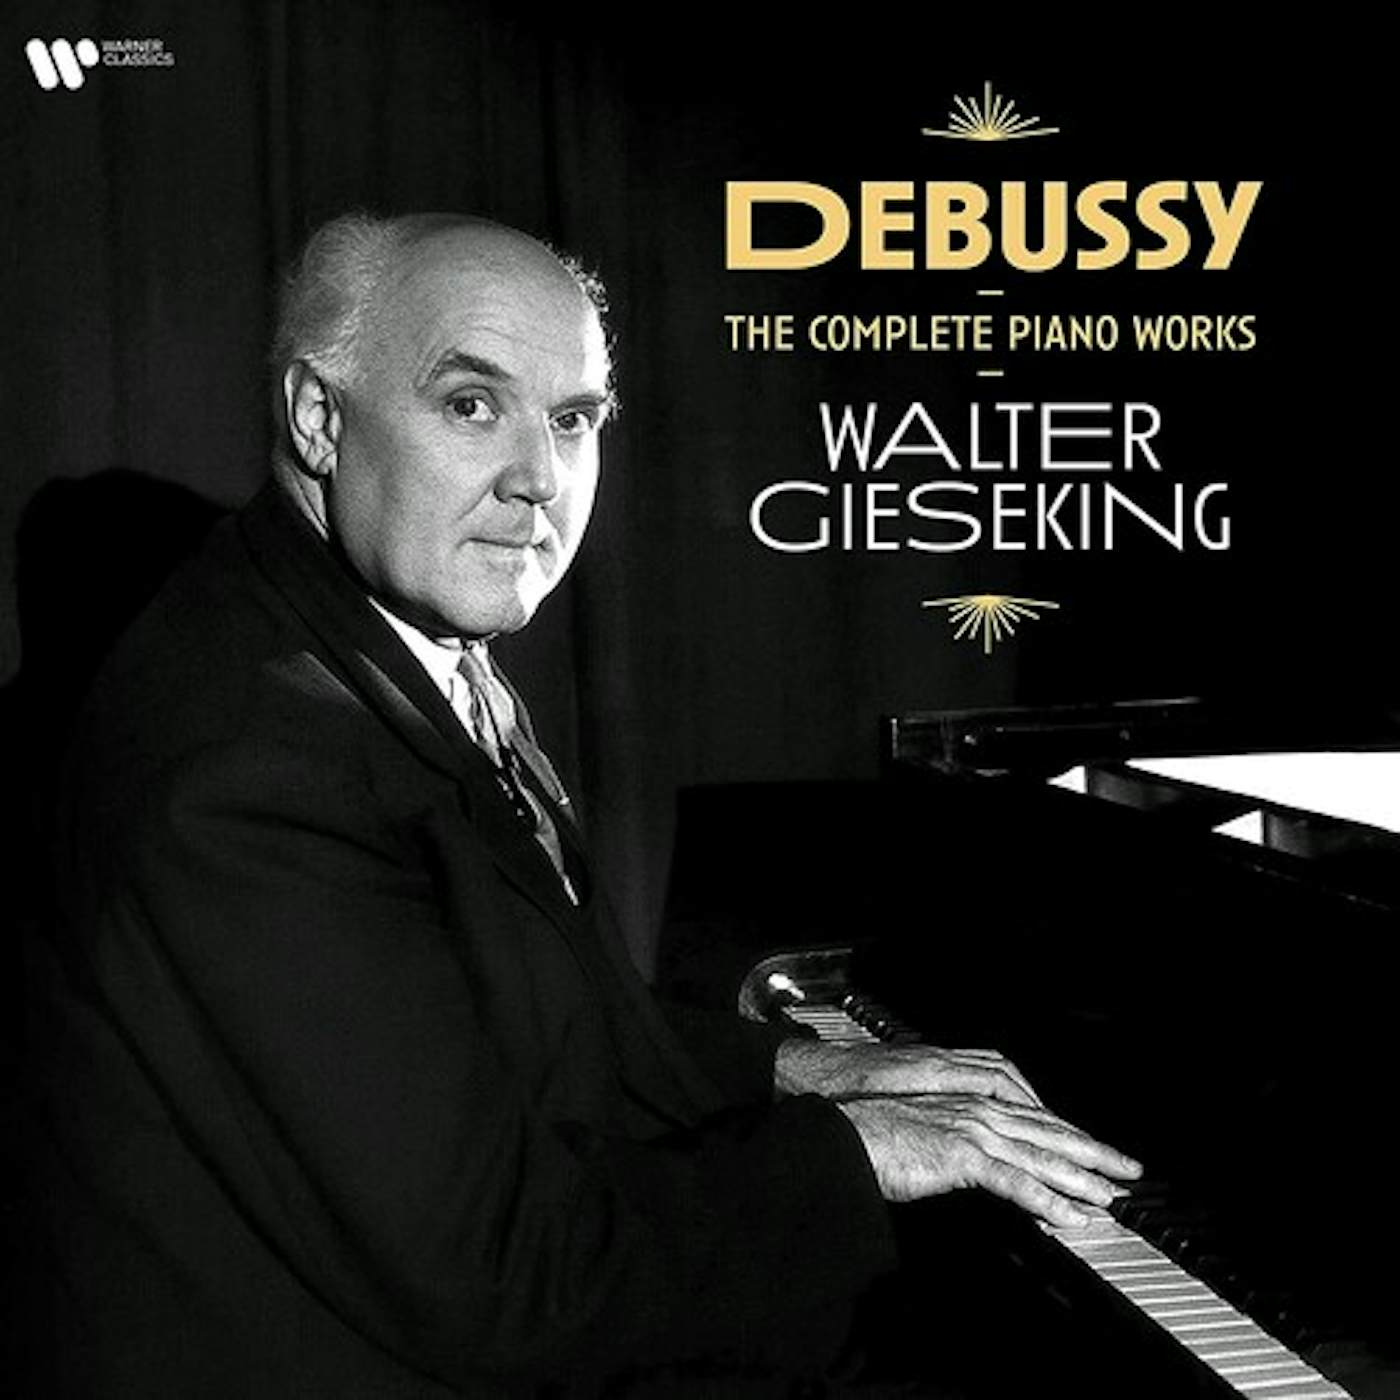 Walter Gieseking DEBUSSY PIANO WORKS Vinyl Record